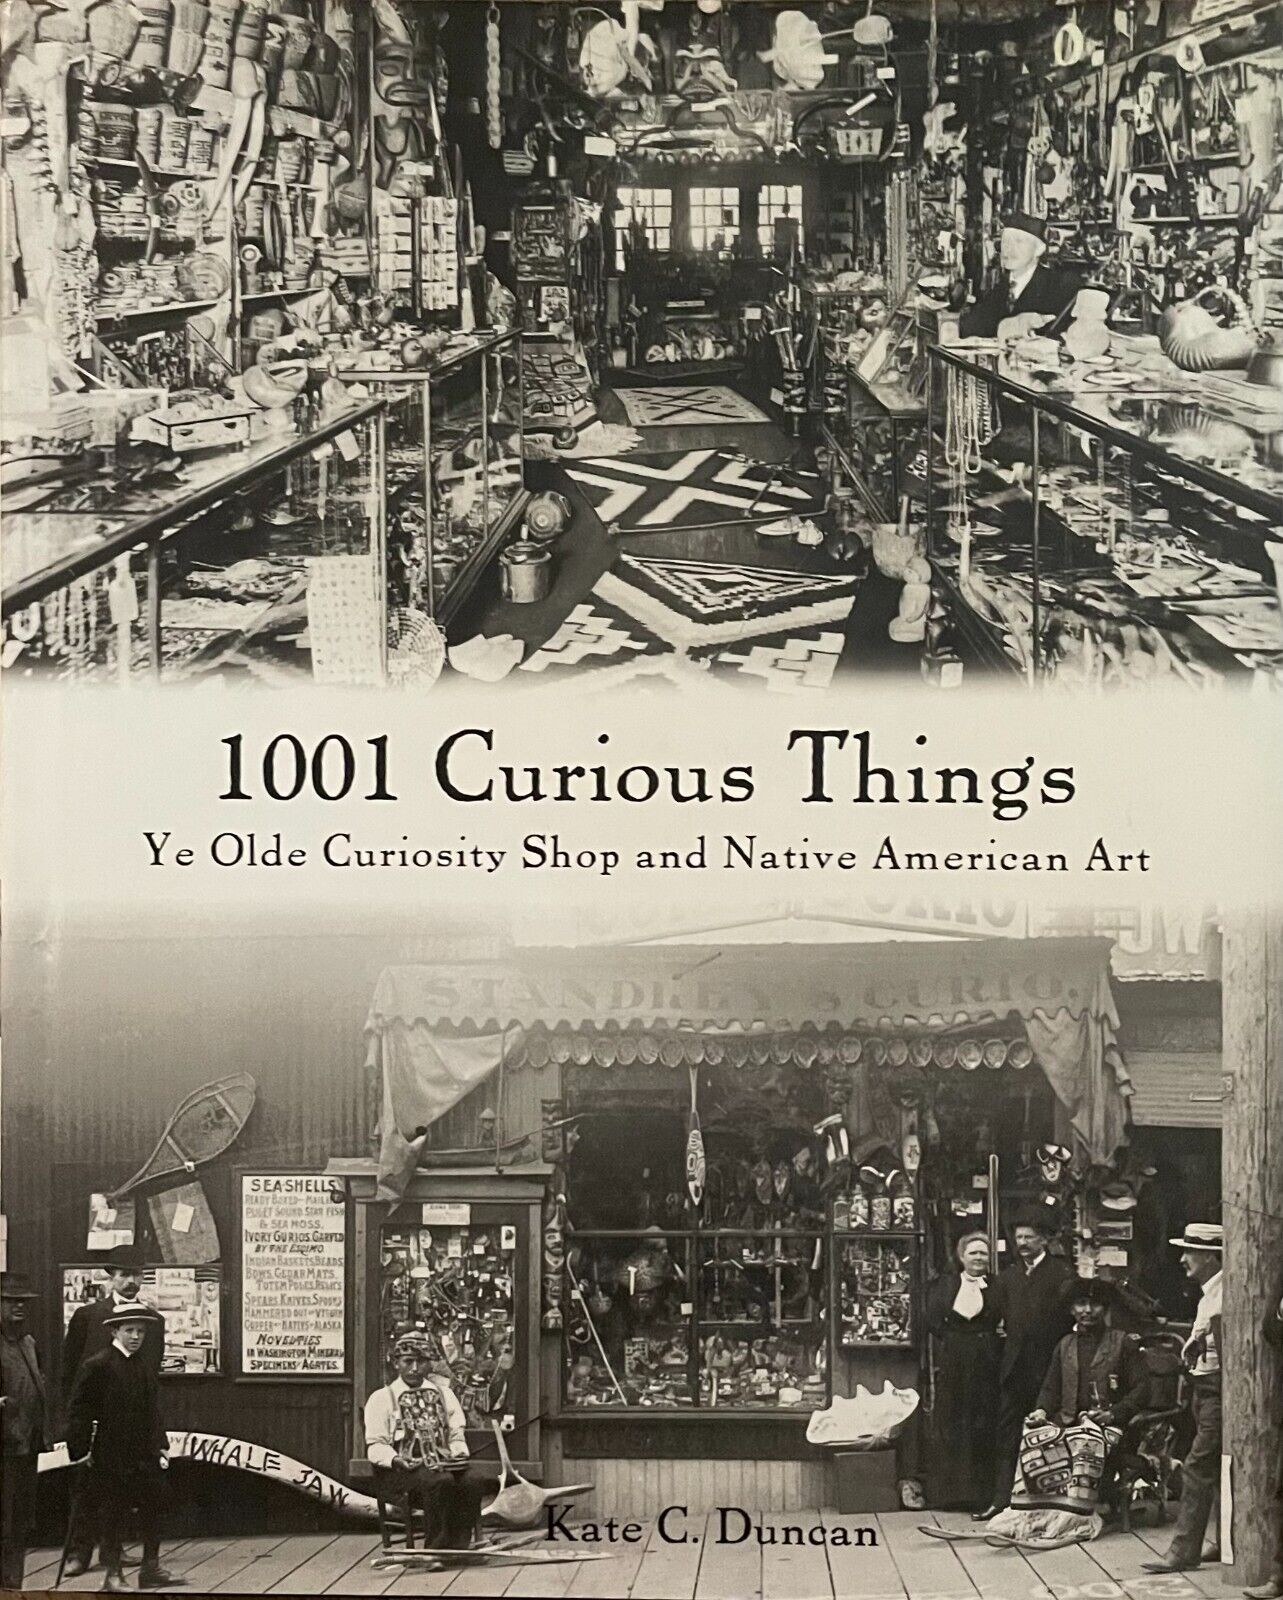 1001 CURIOUS THINGS-NATIVE AMERICAN-YE OLD CURIOSITY SHOP-NEW-1ST EDITION-DJ